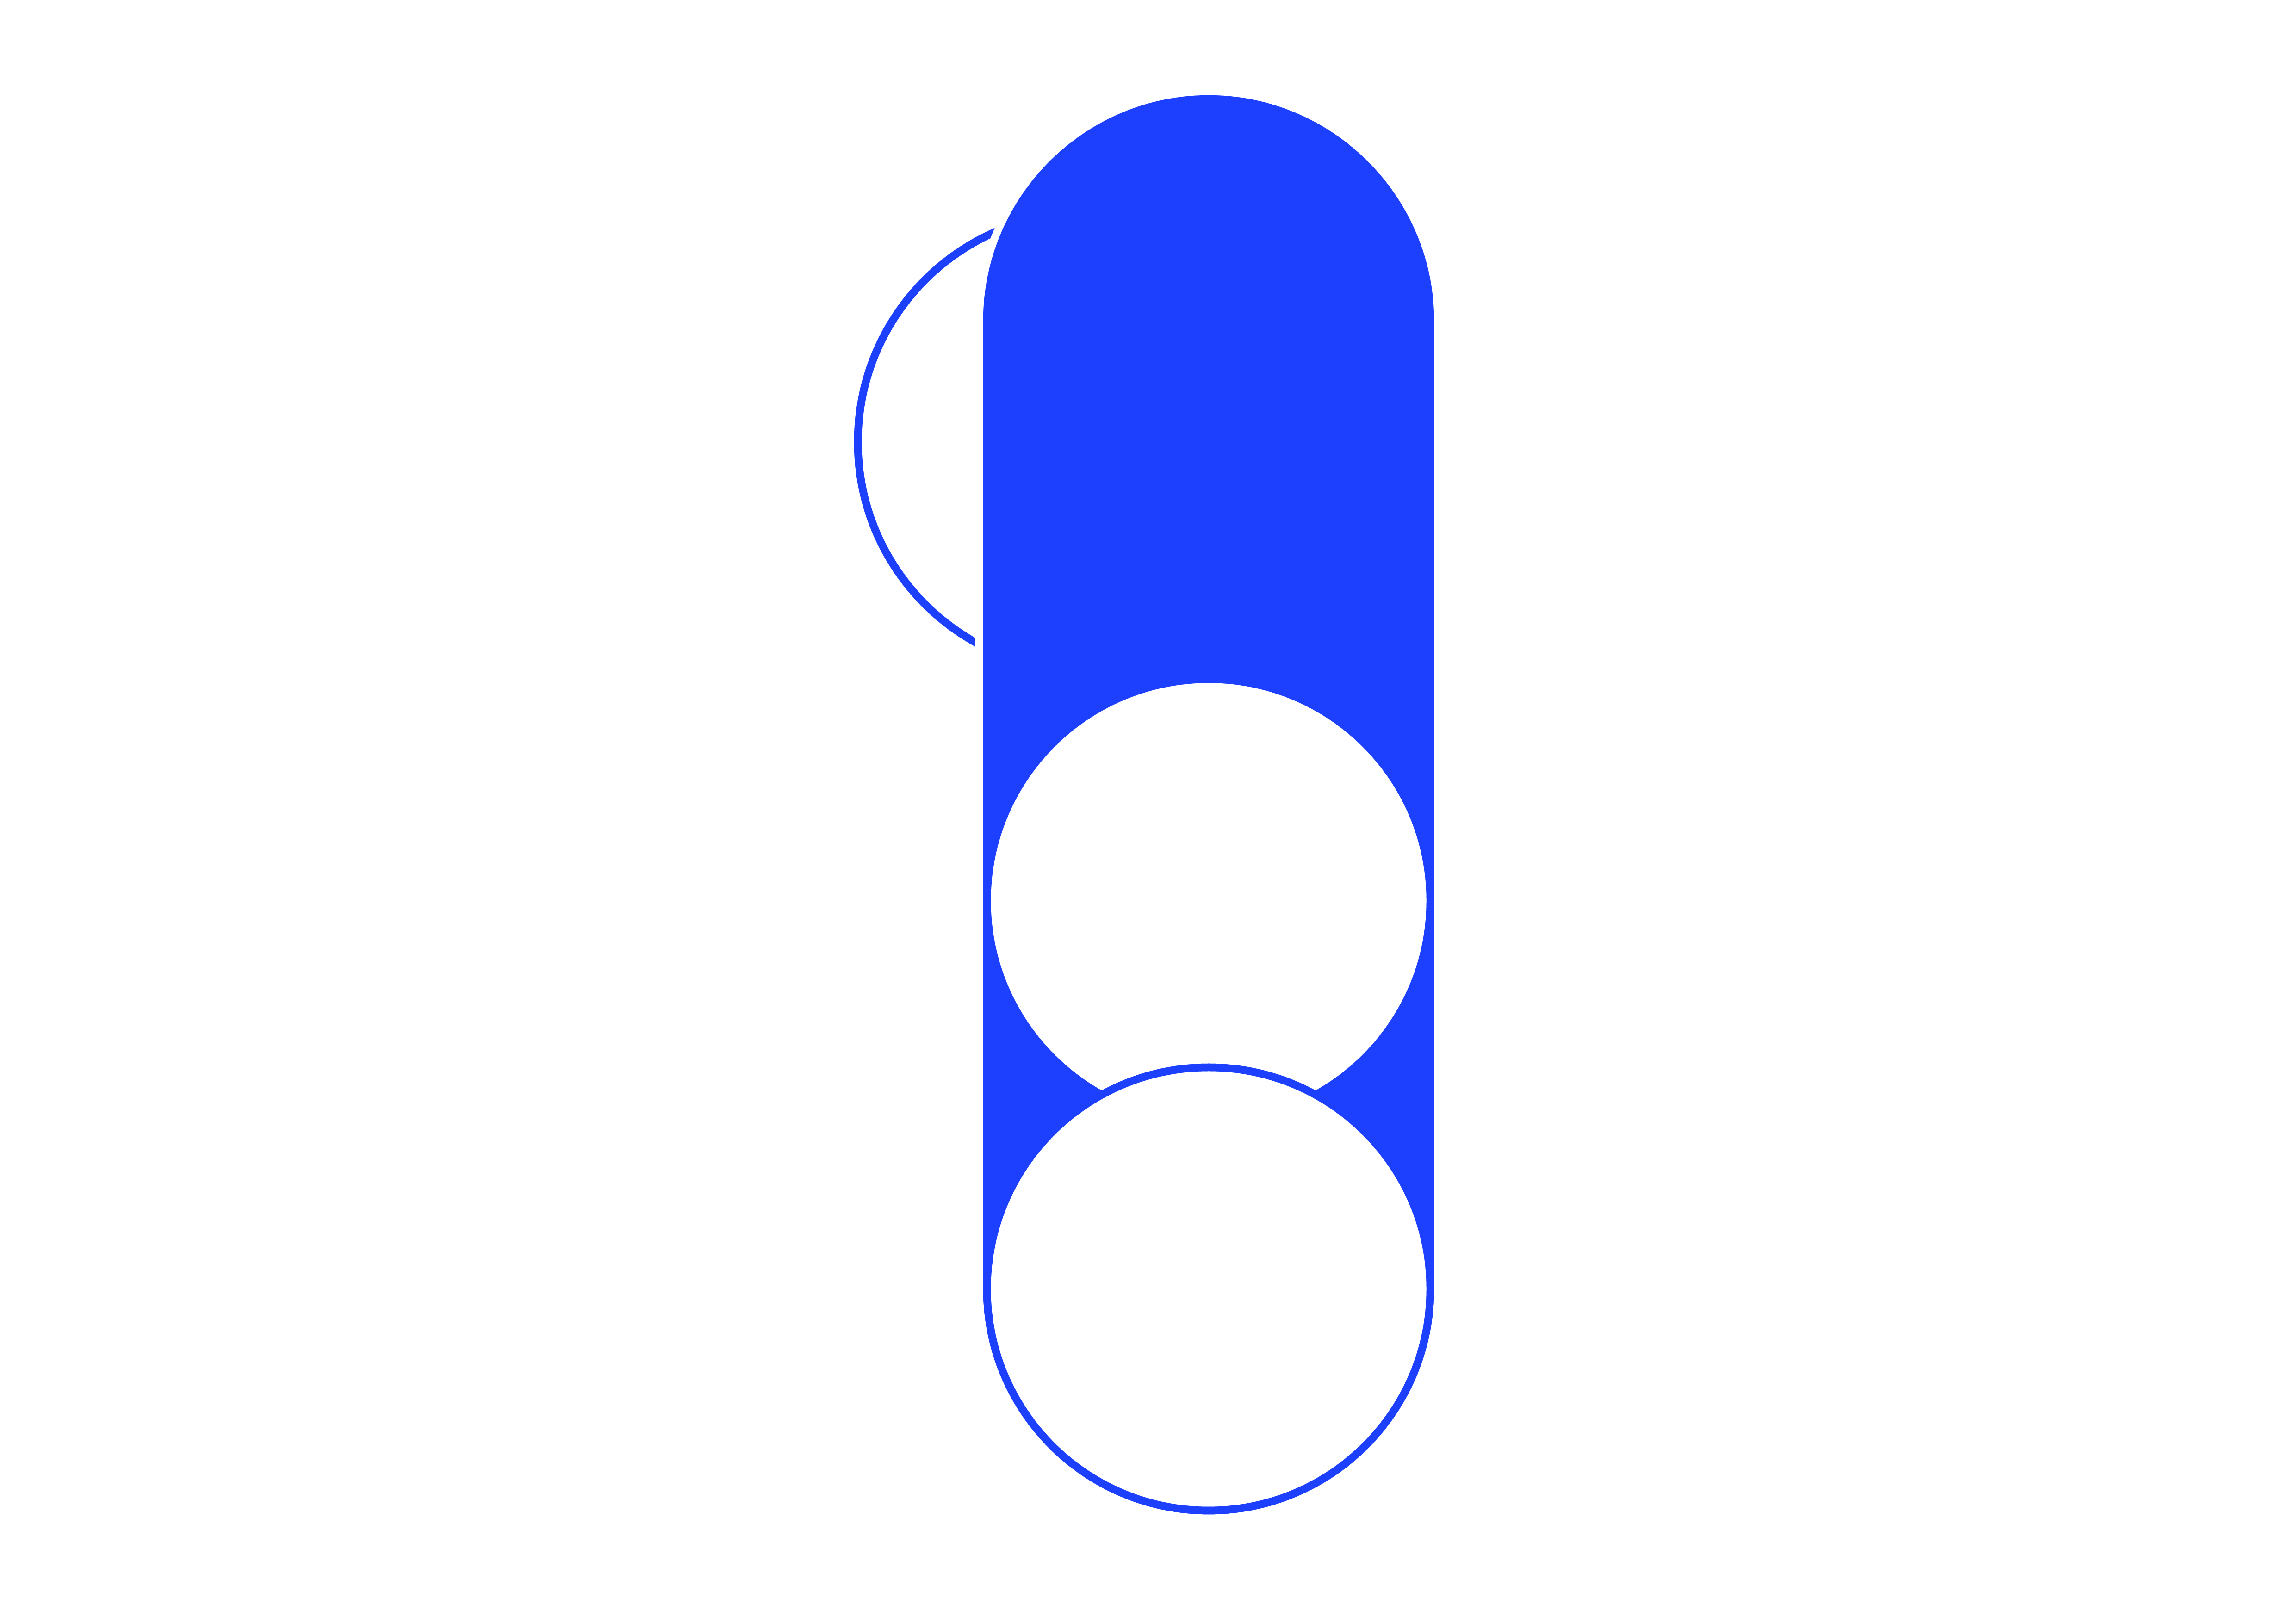 One to one thousand logo in blue colour